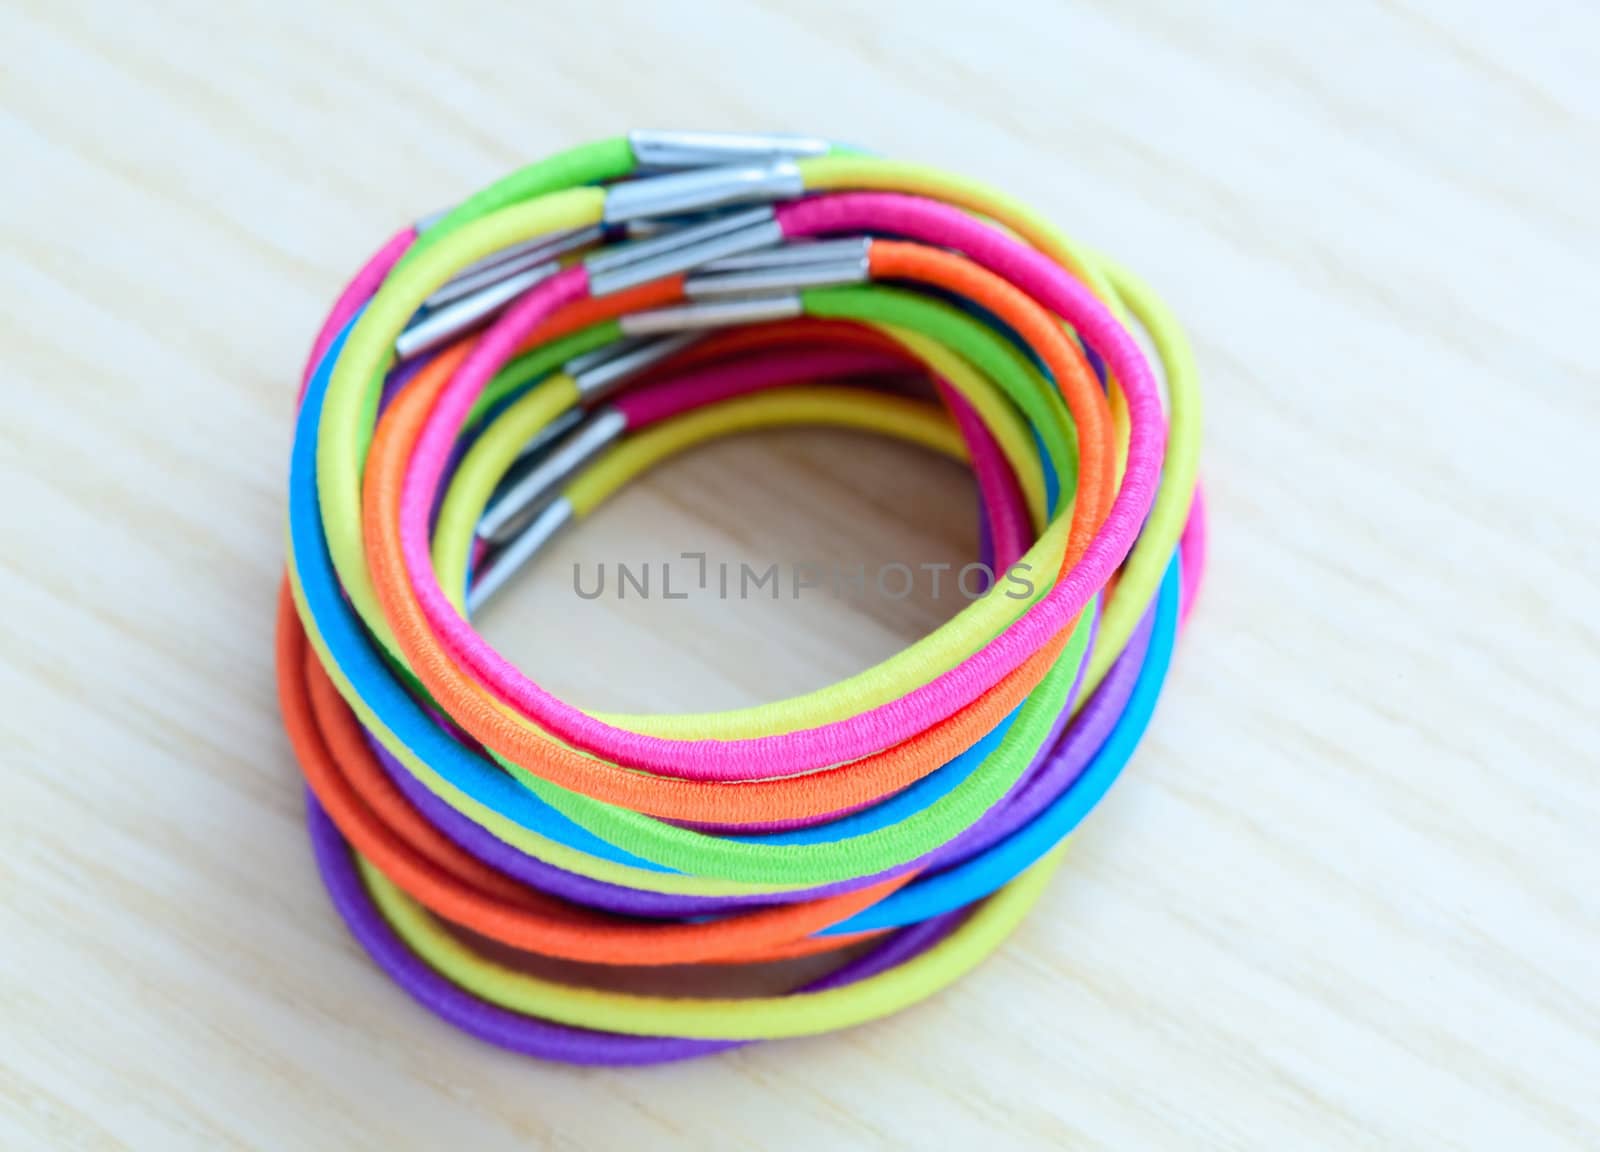 Colored rubber bands